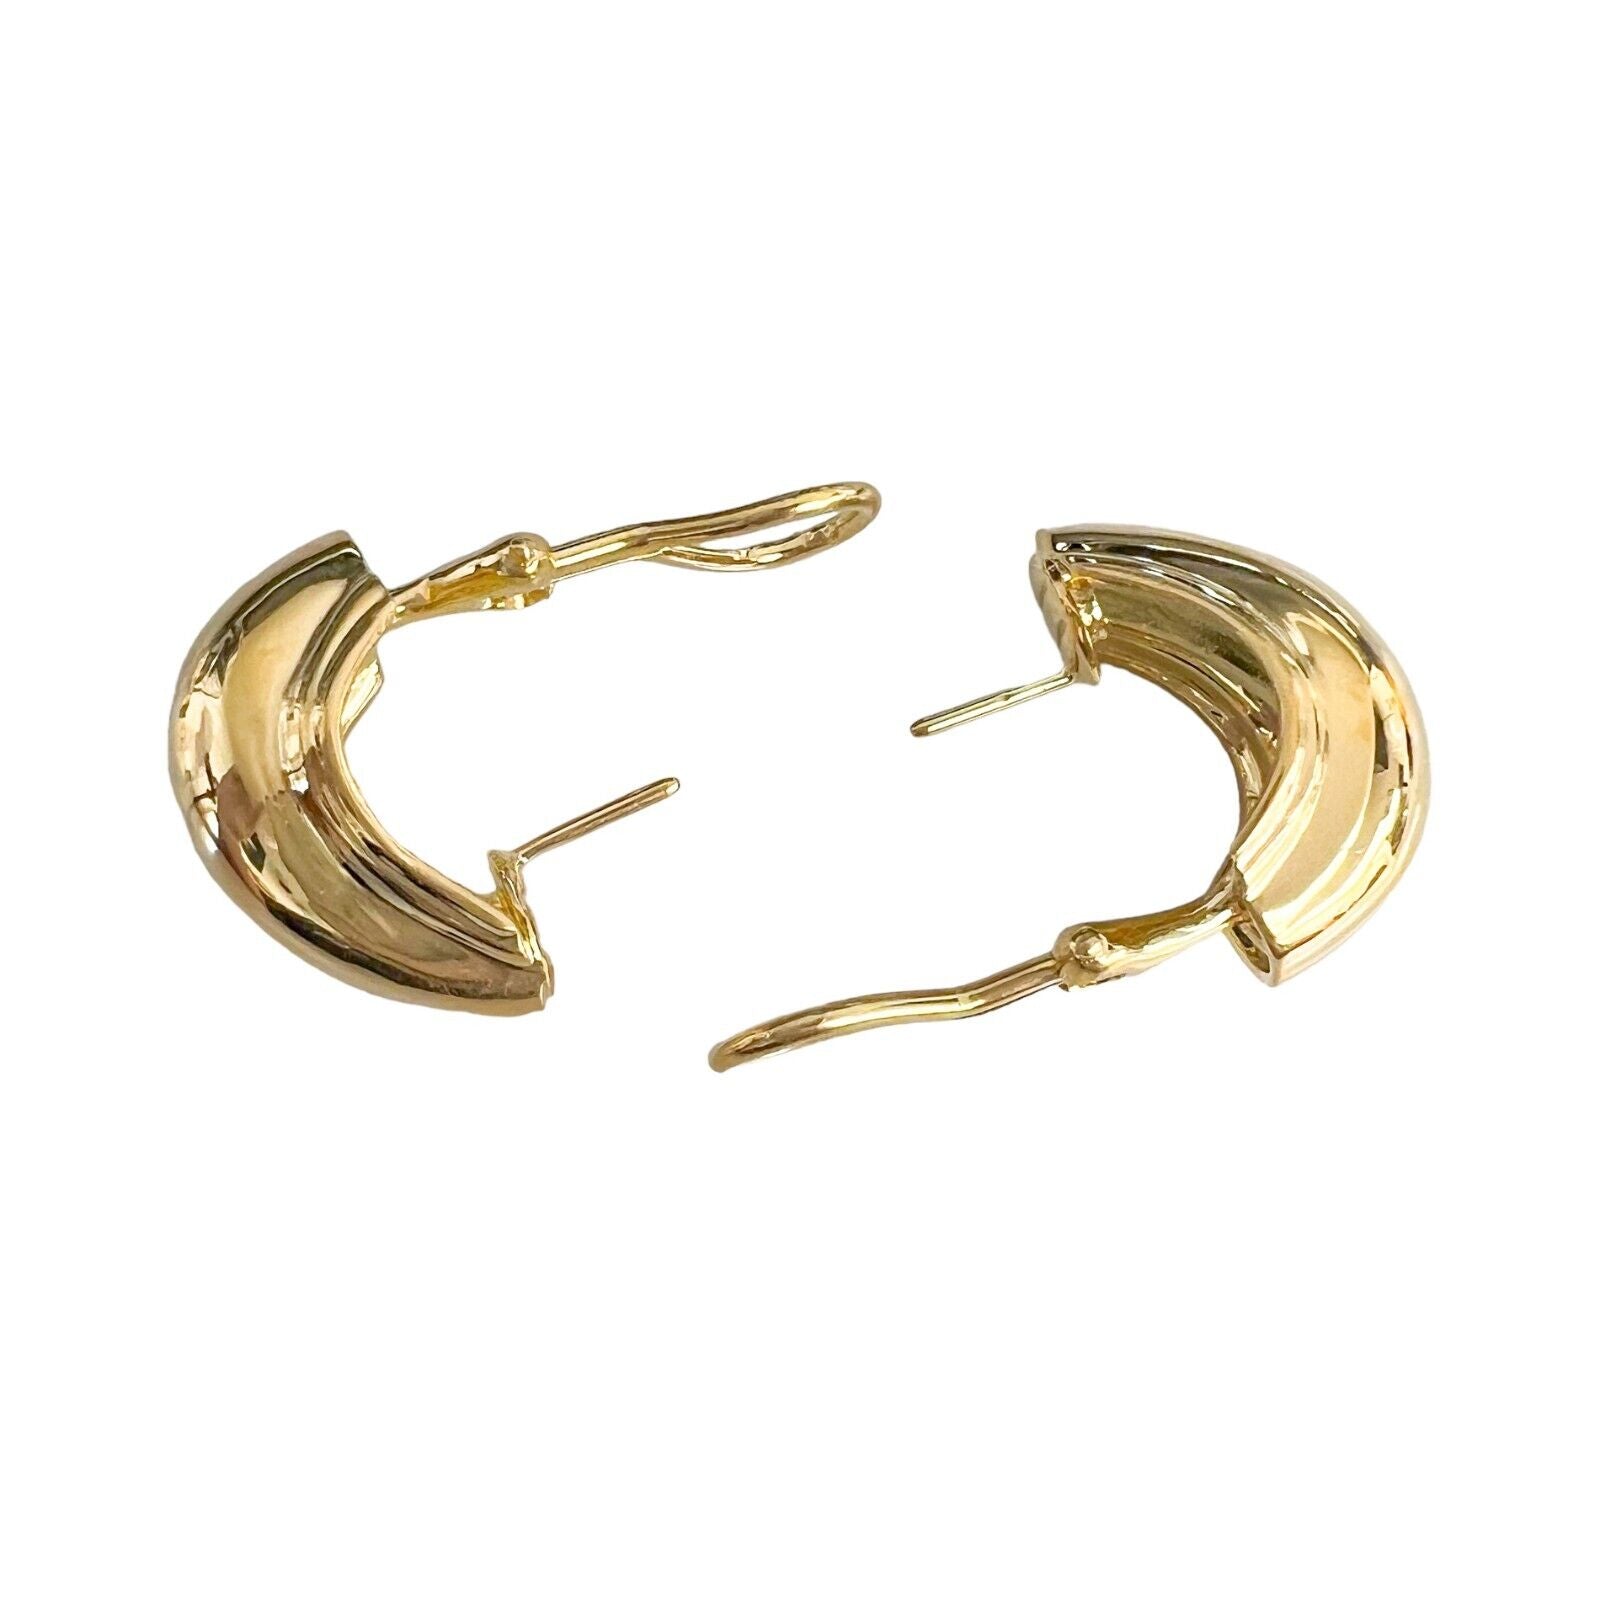 Tiffany & Co. Paloma Picasso Vendome 18k Yellow Gold Half Hoop Earrings 15.4g